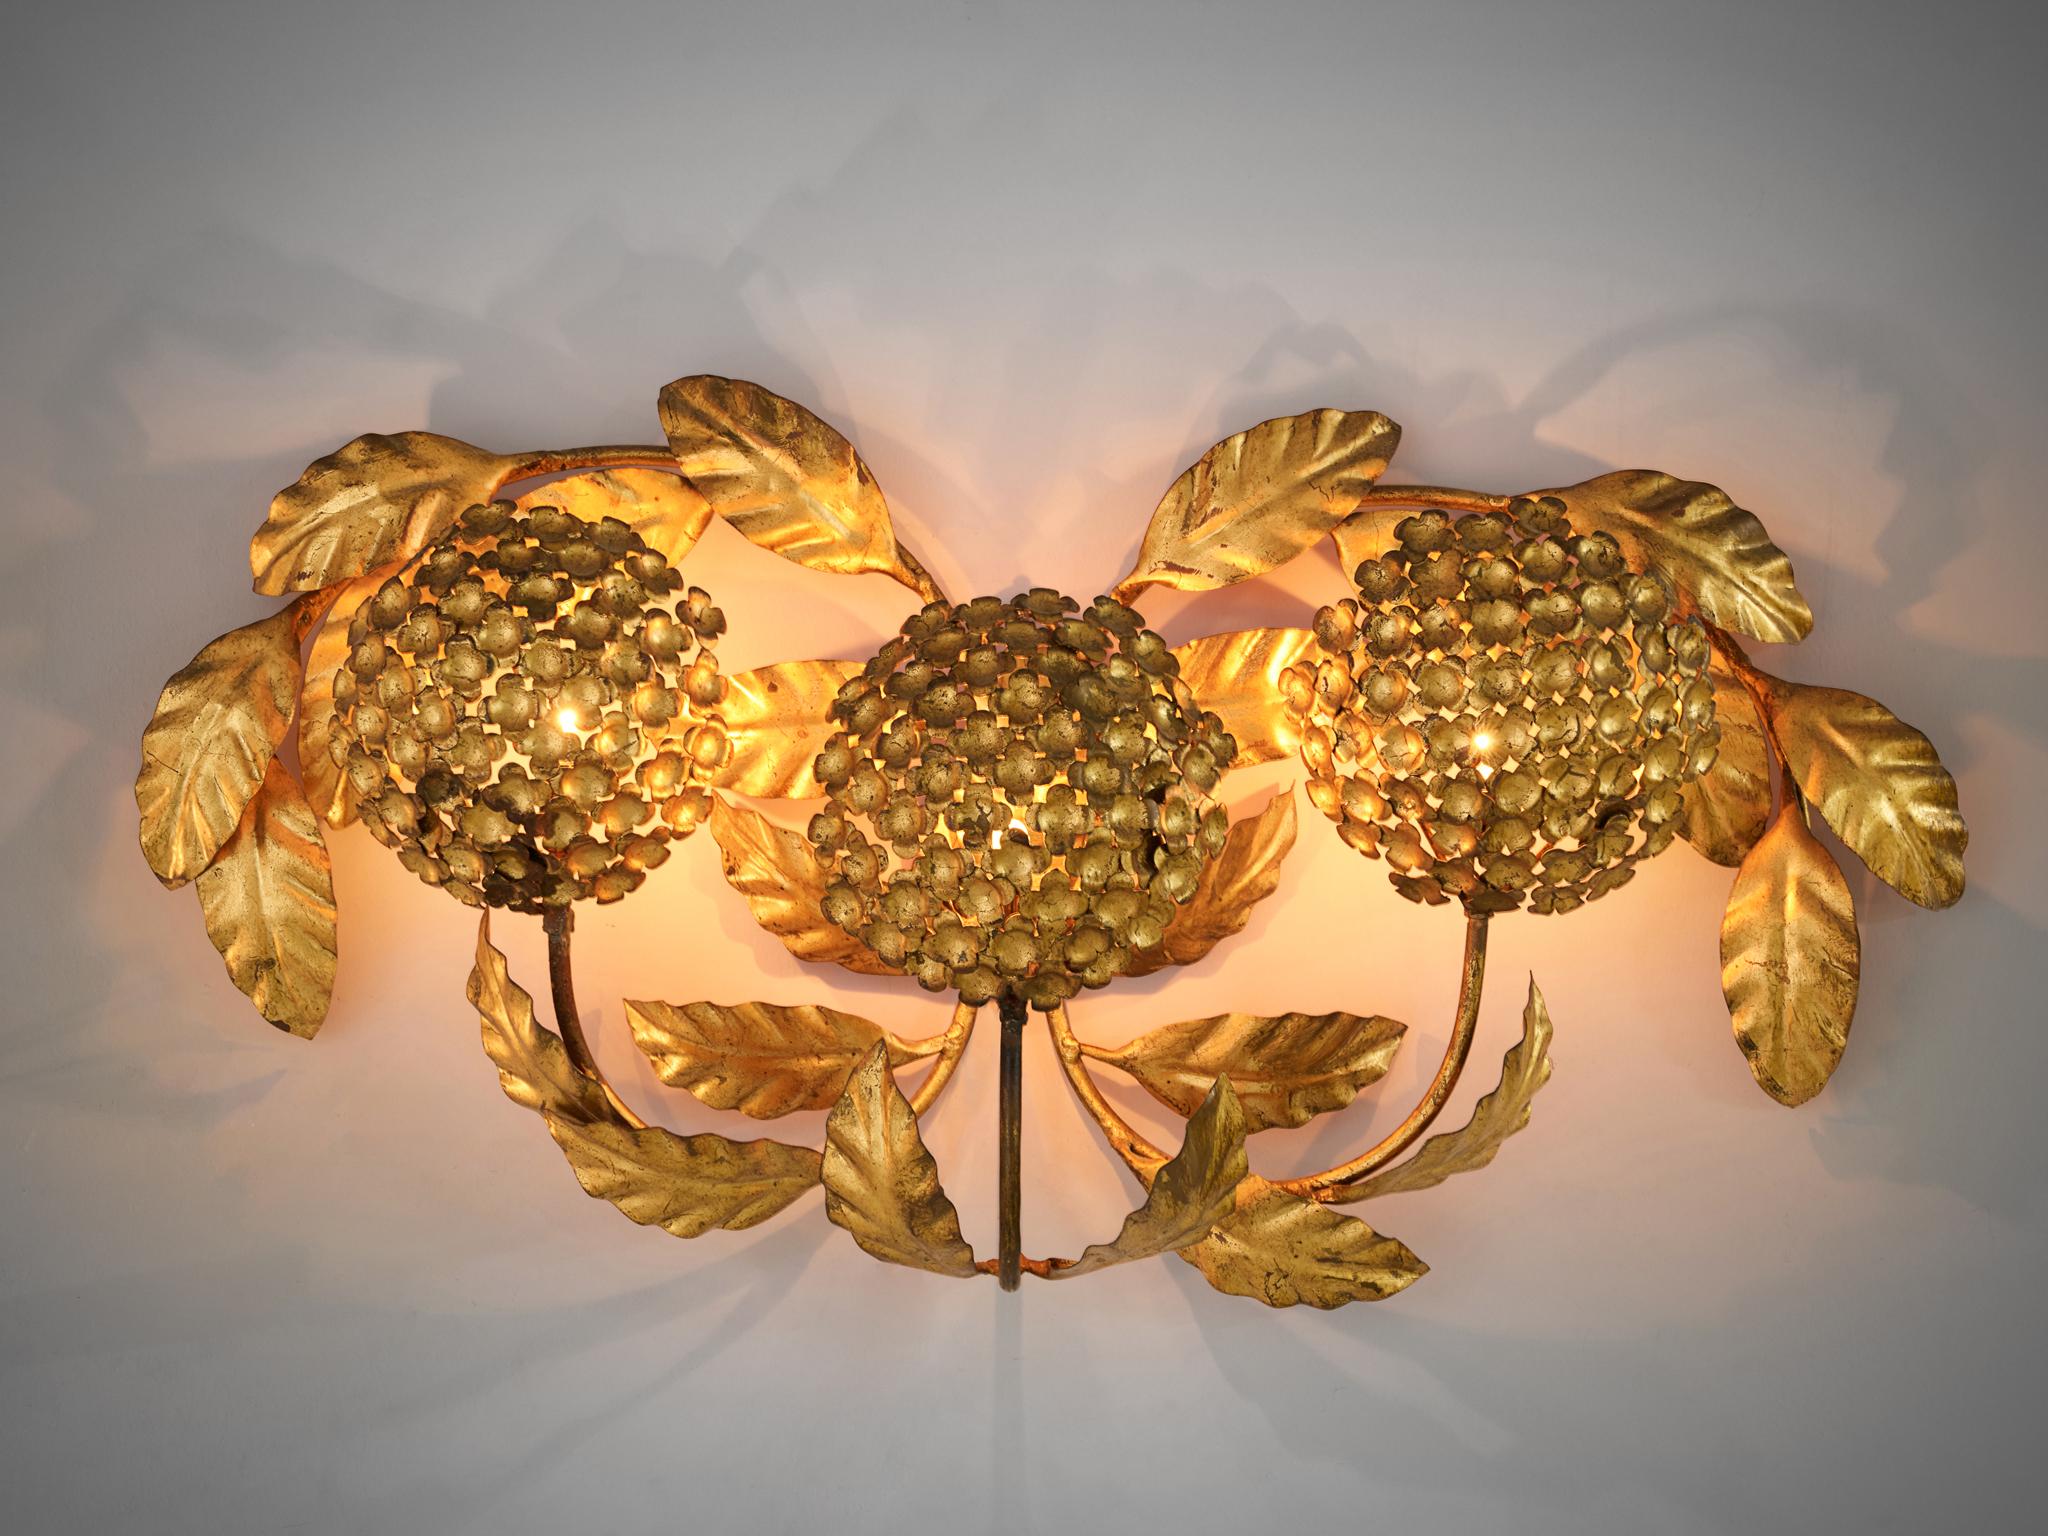 Floral wall light, brass, European, 1960s.

The lamp consists of three bulbs of flowers that diffuse the direct light. These bulbs protrude from the wall by their stems. The leaves that adorn the three bulbs get beautifully lit by the lamp, giving